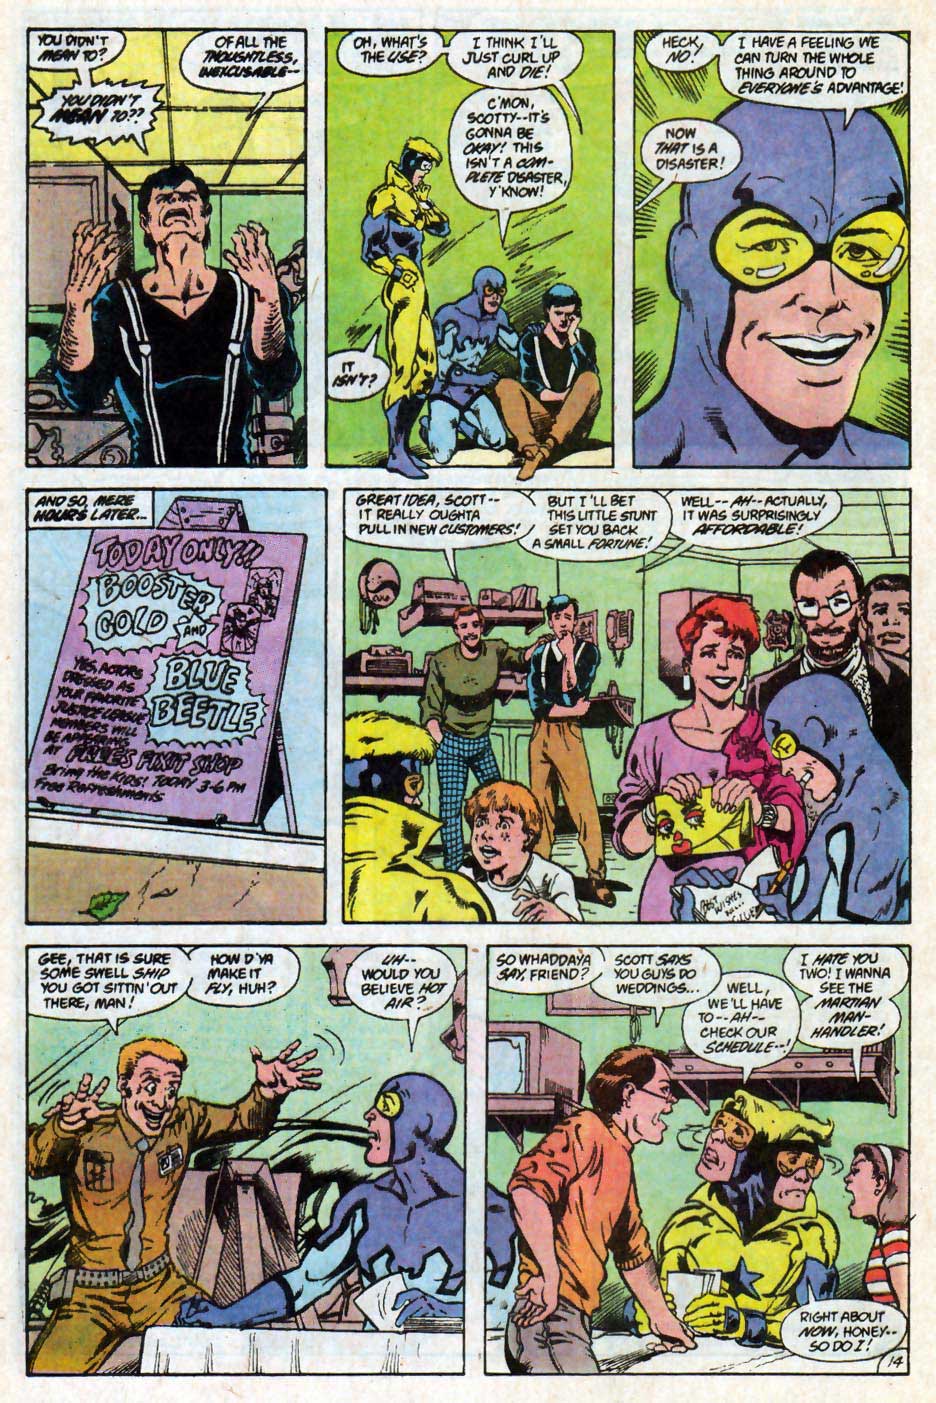 Mister Miracle #7 - Plot by J. M. DeMatteis, Script by Len Wein, art by Joe Phillips and Pablo Marcos